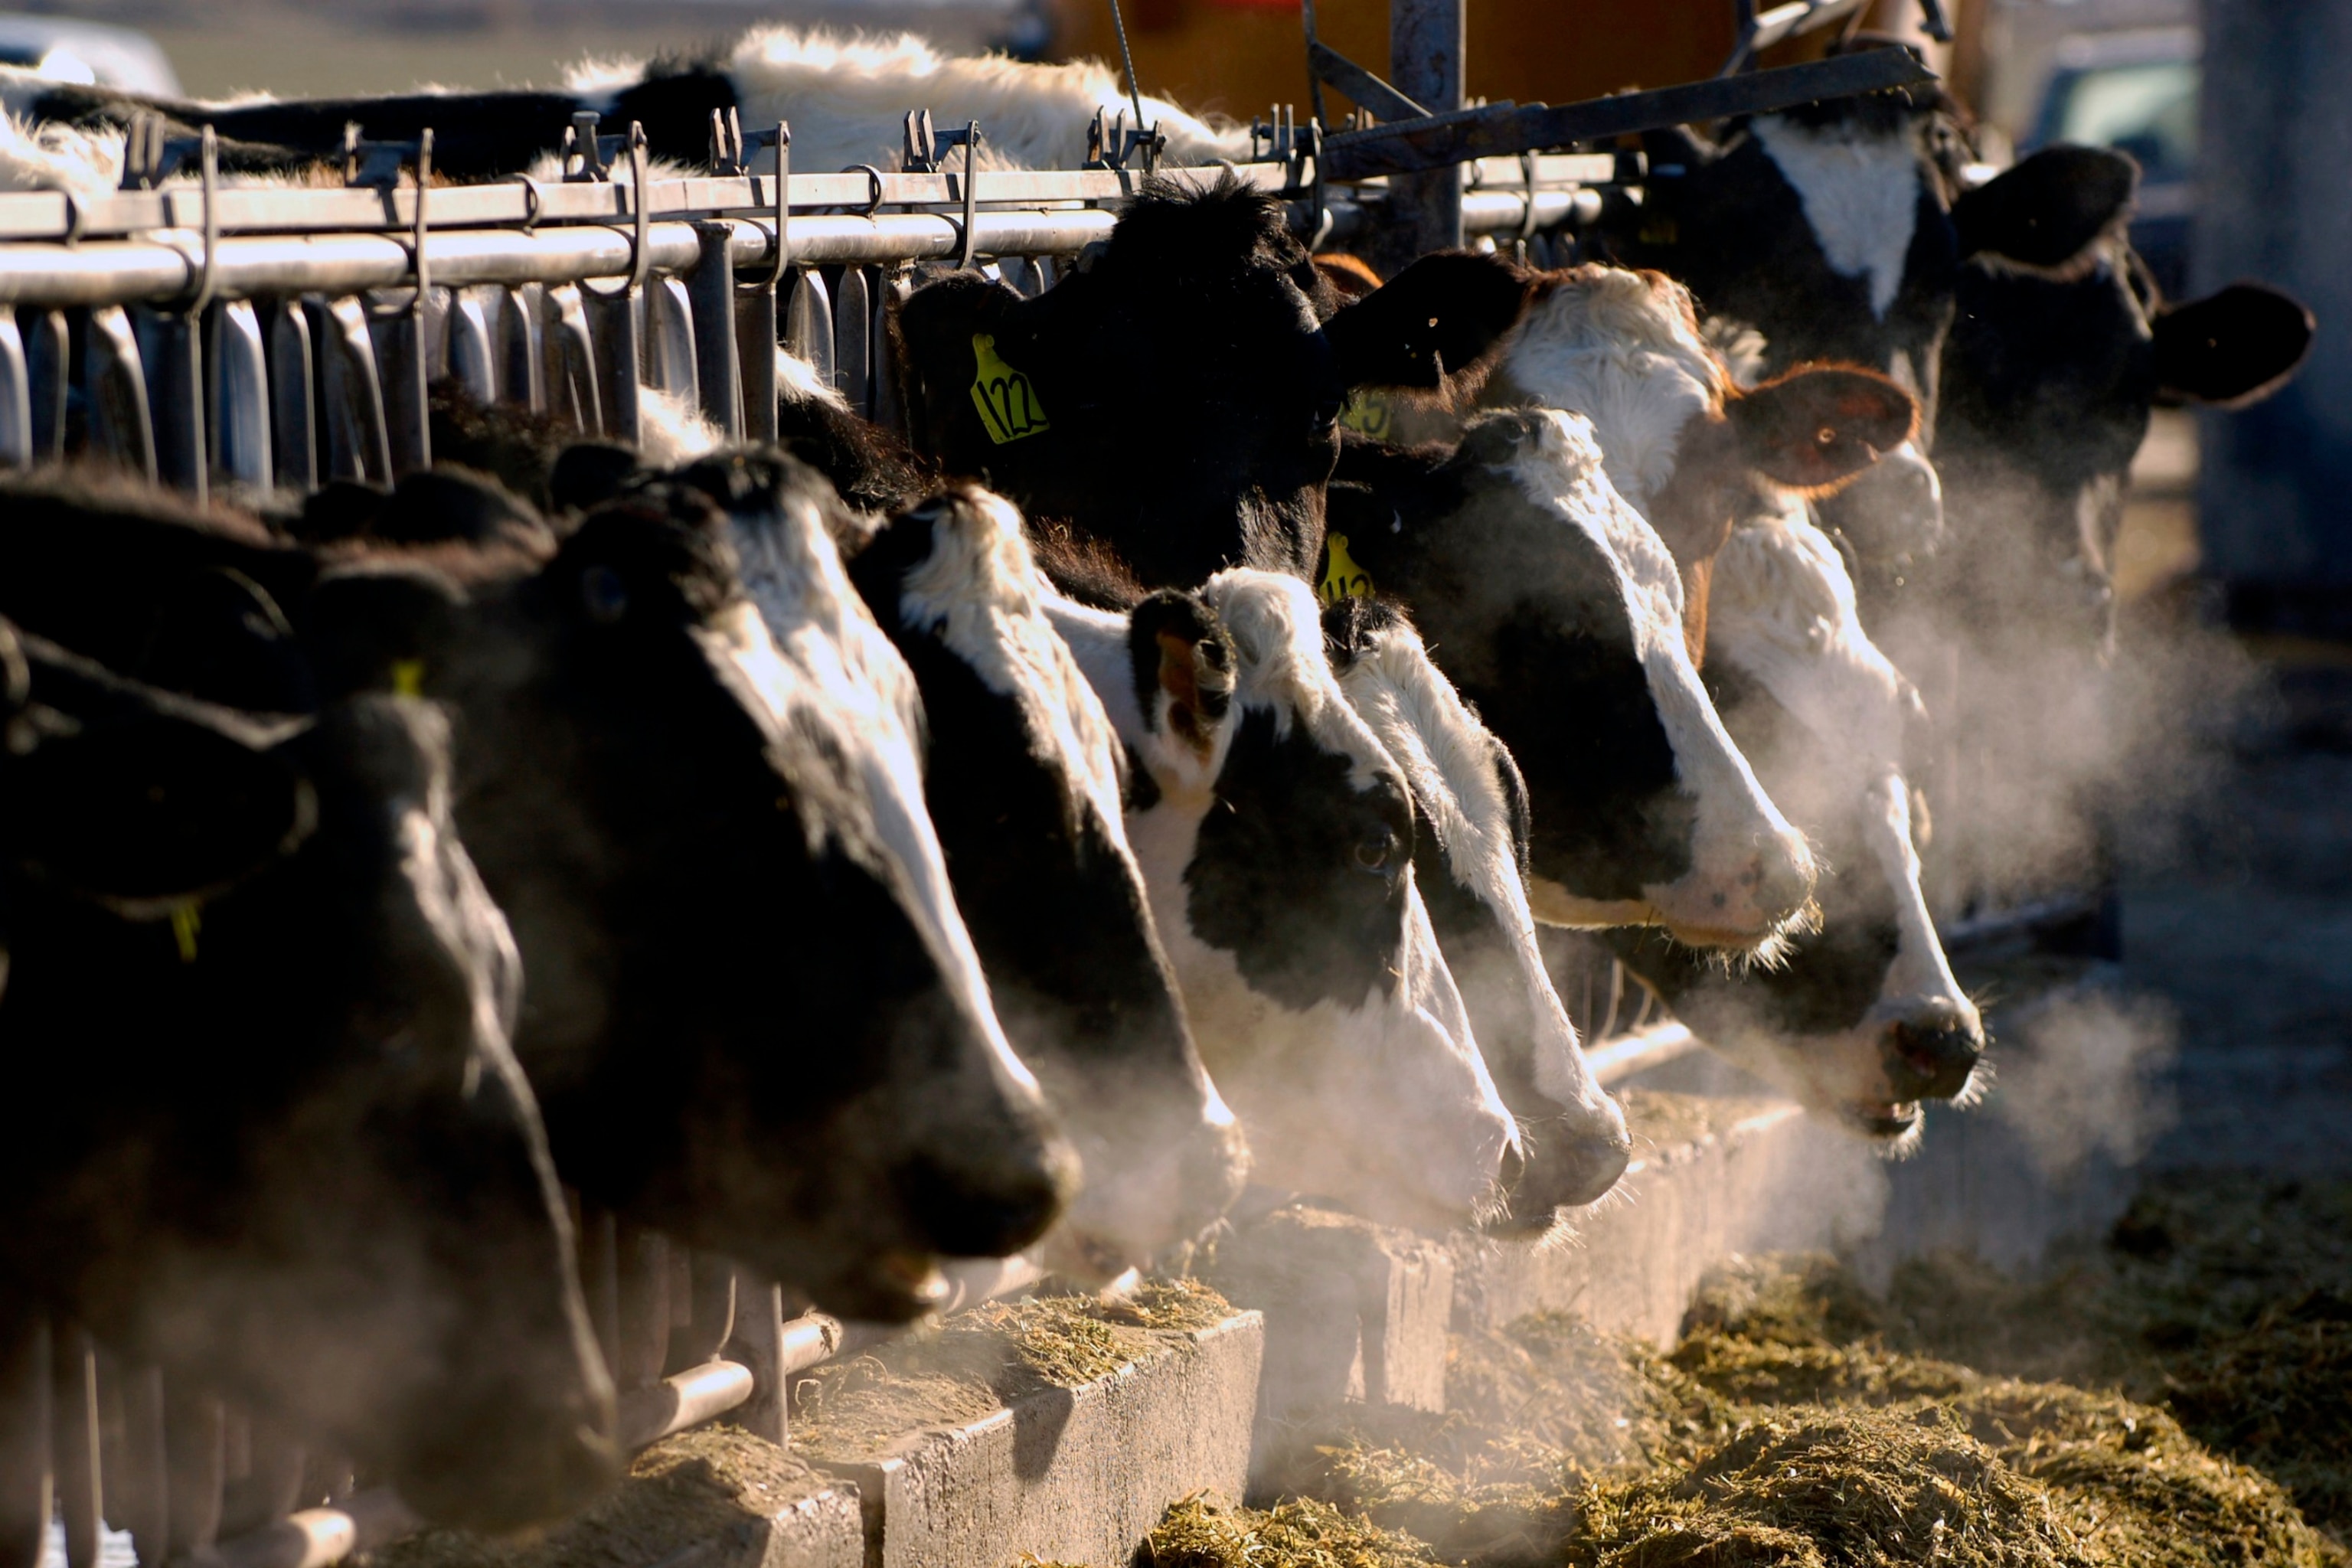 PHOTO: A line of Holstein dairy cows feed through a fence at a dairy farm in Idaho on March 11, 2009.